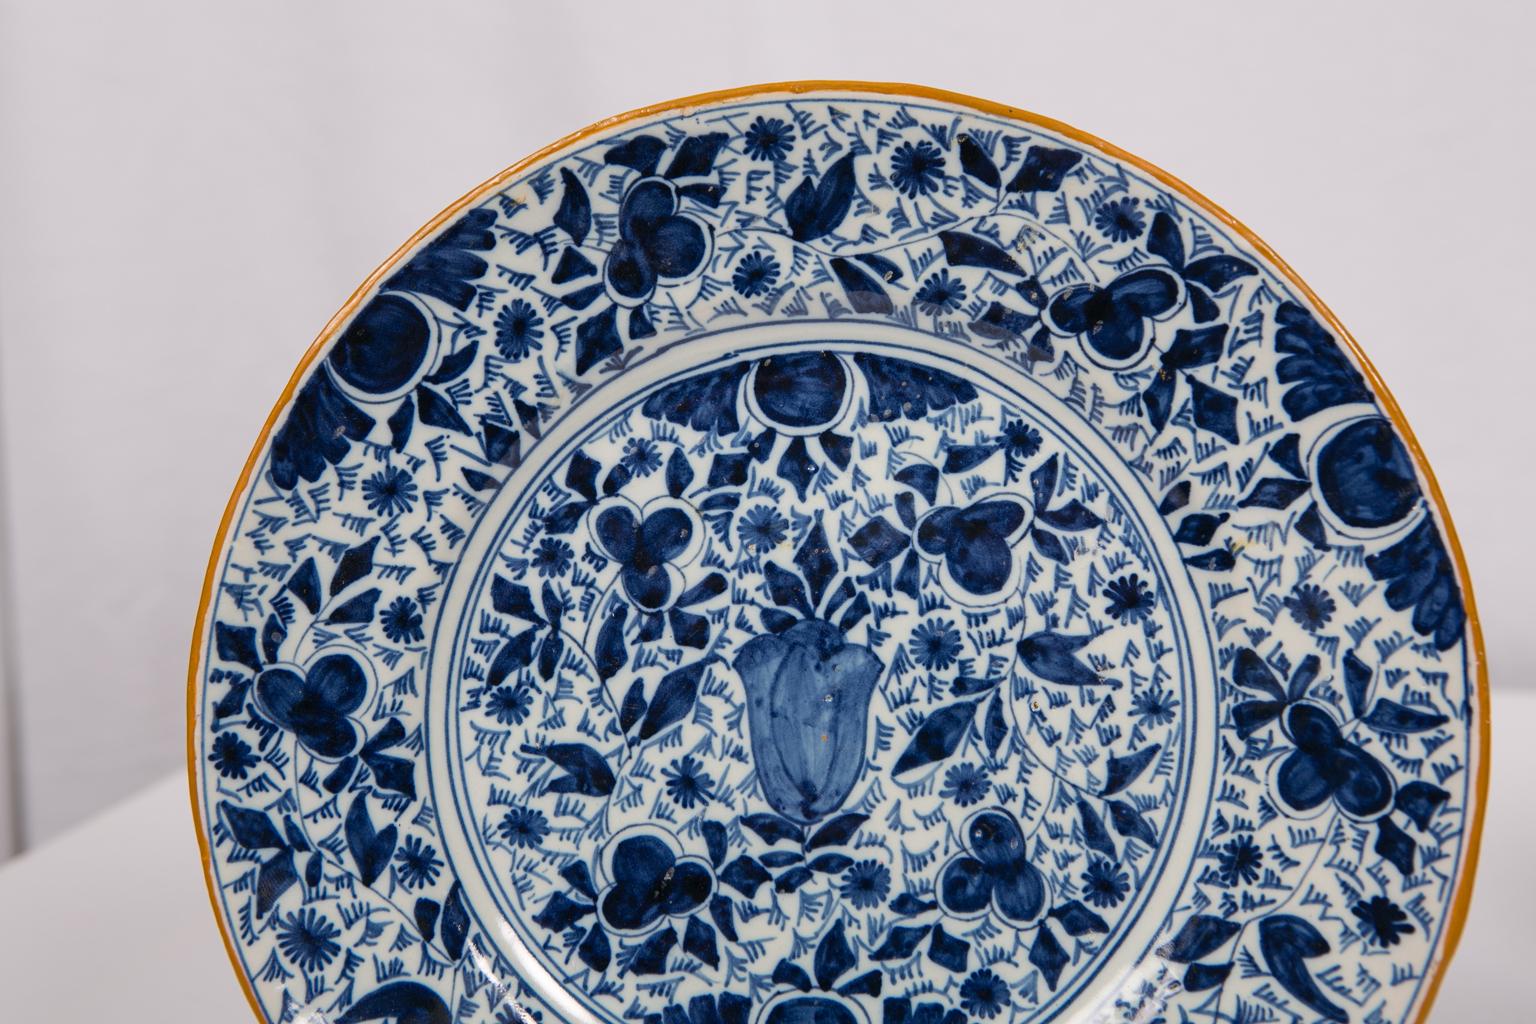 Hand-Painted Pair of Antique Blue and White Delft Plates Made in the 18th Century